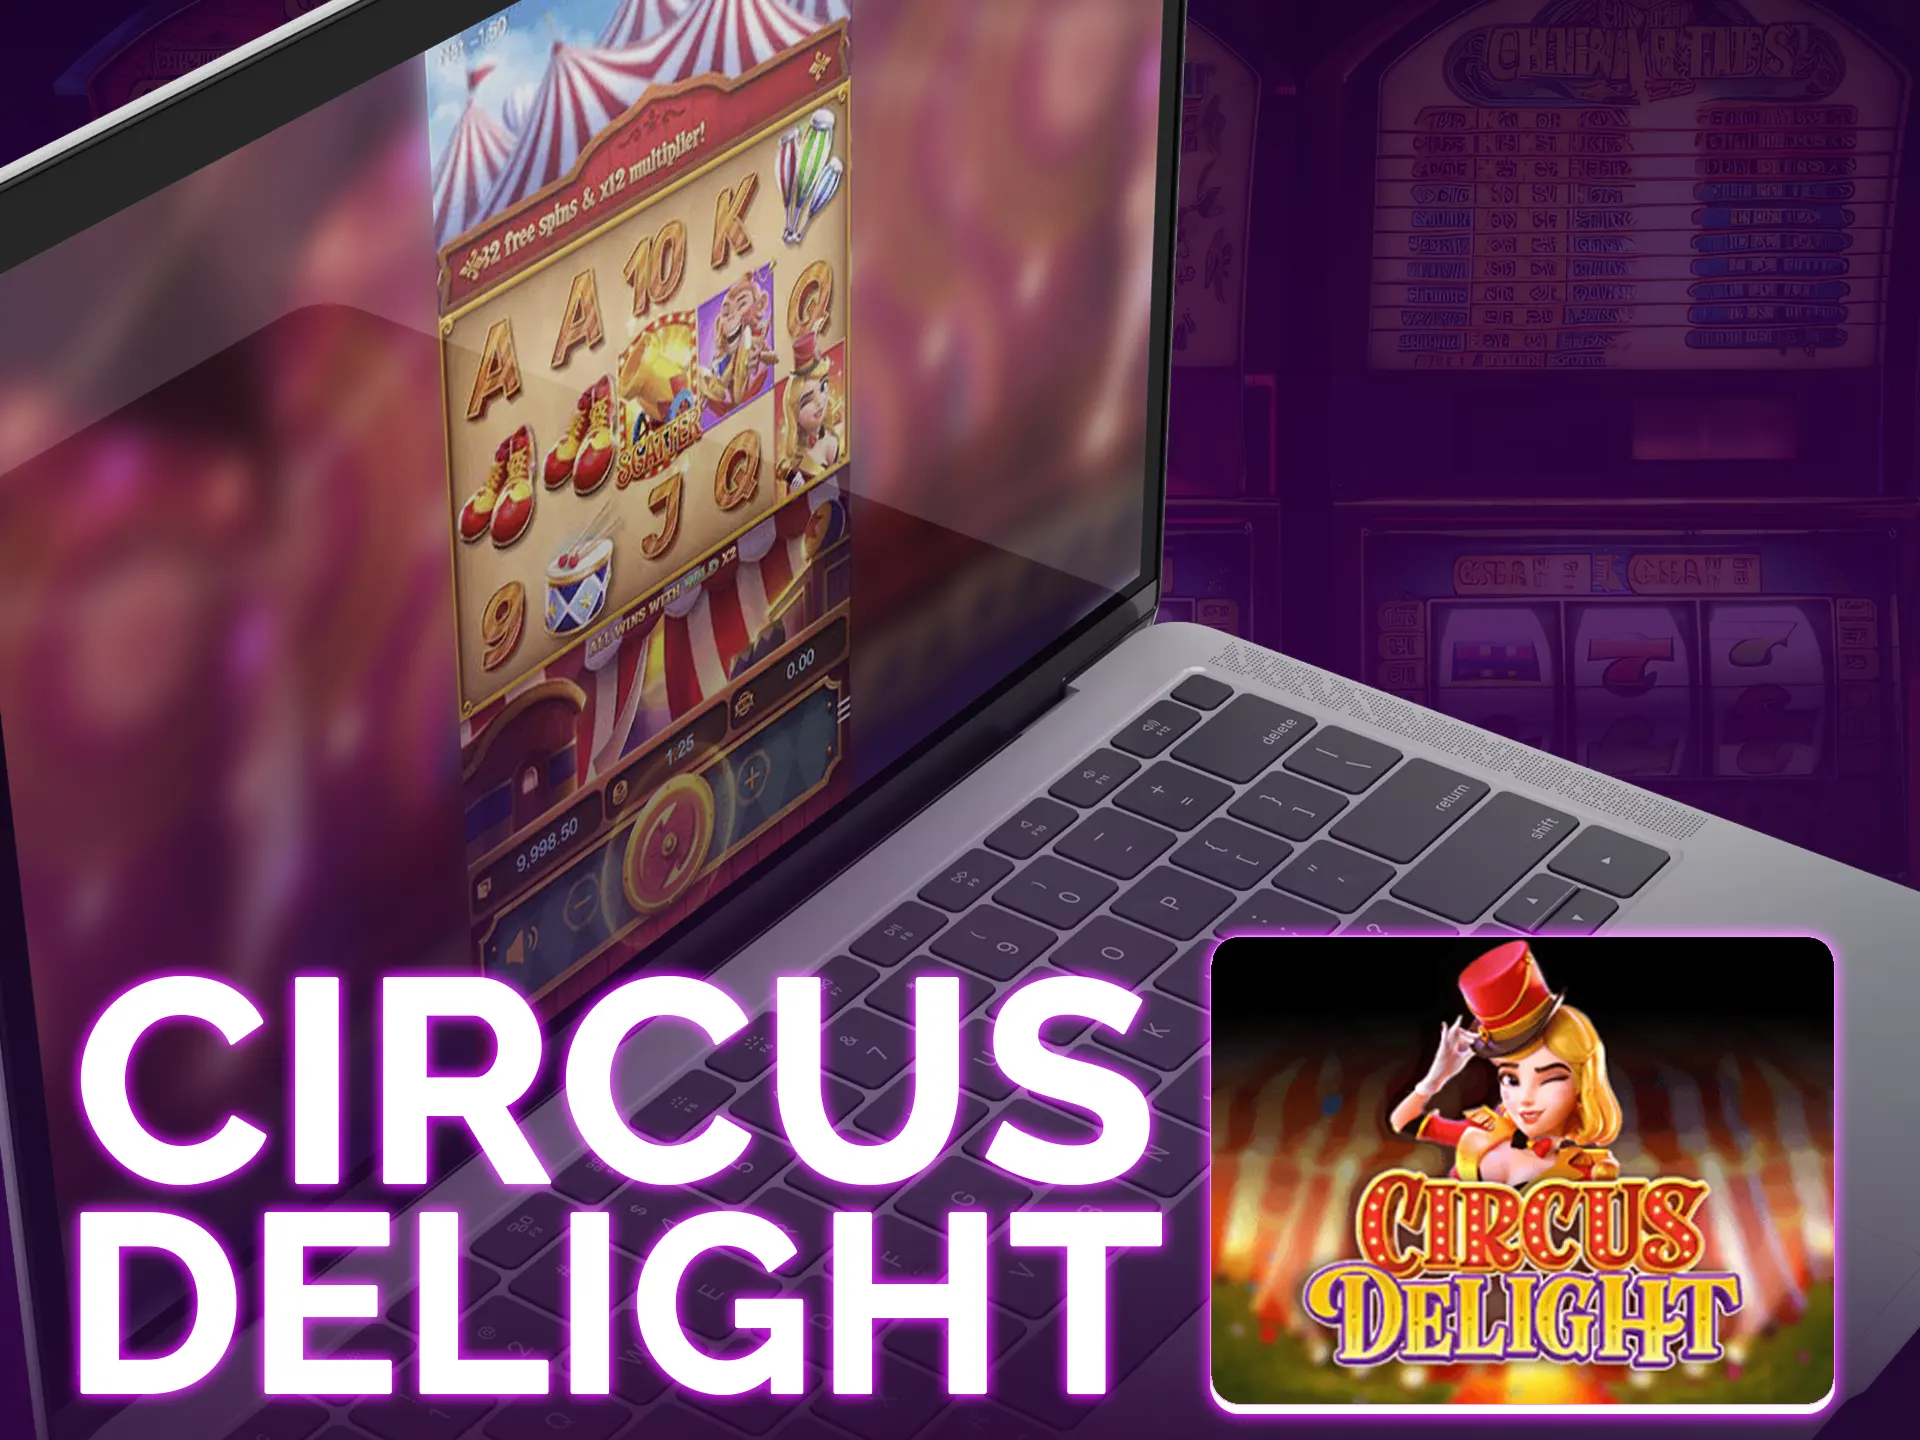 Circus delight it`s a slot with high volatility, 5 reels, and 25 paylines.